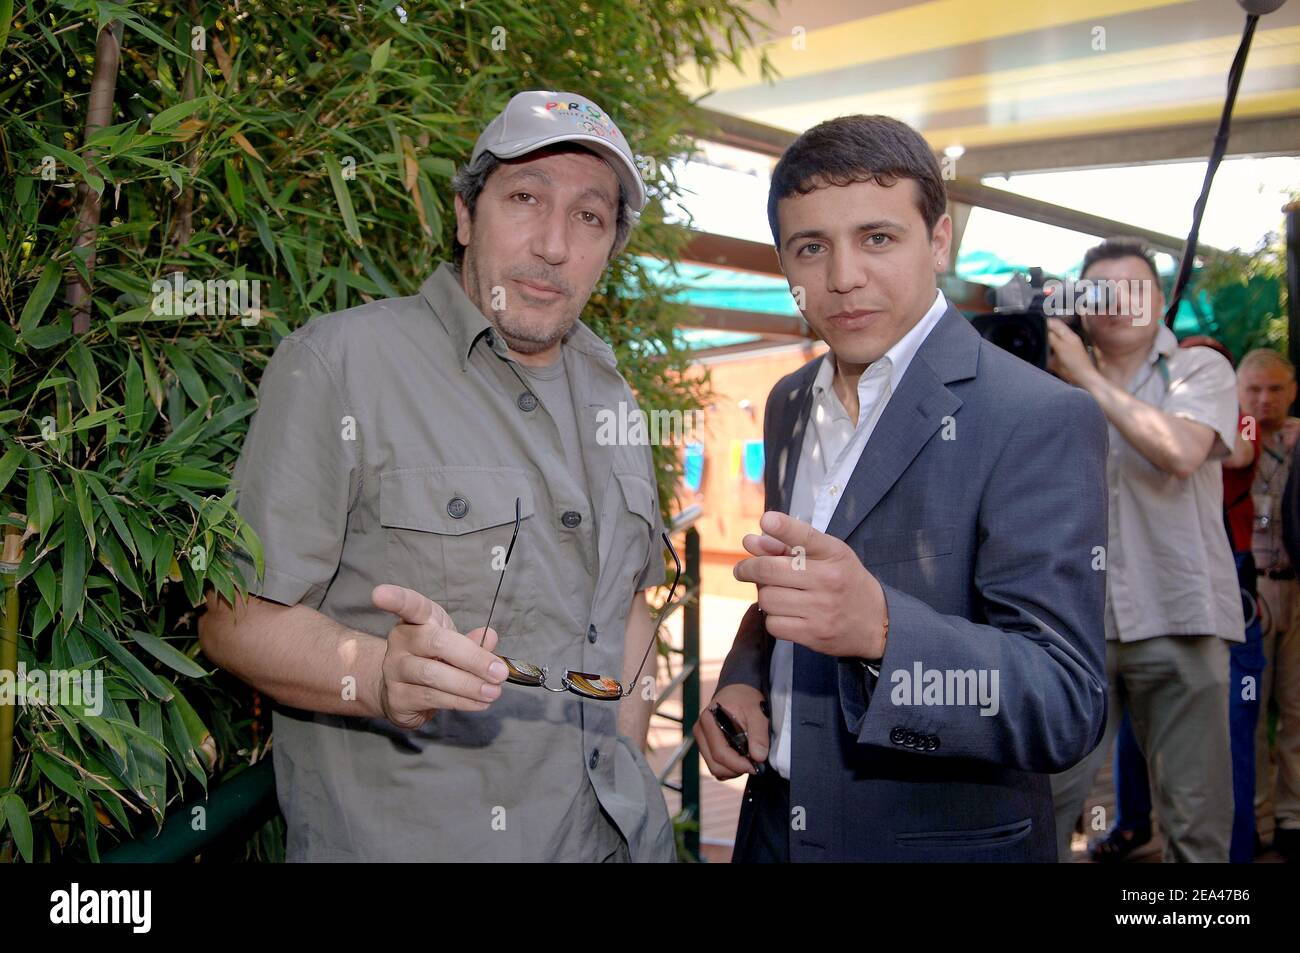 French actor and director Alain Chabat and Rai singer Faudel at the French Open in Roland Garros stadium in Paris, France on May 28, 2005. Photo by Gorassini-Zabulon/ABACA Stock Photo